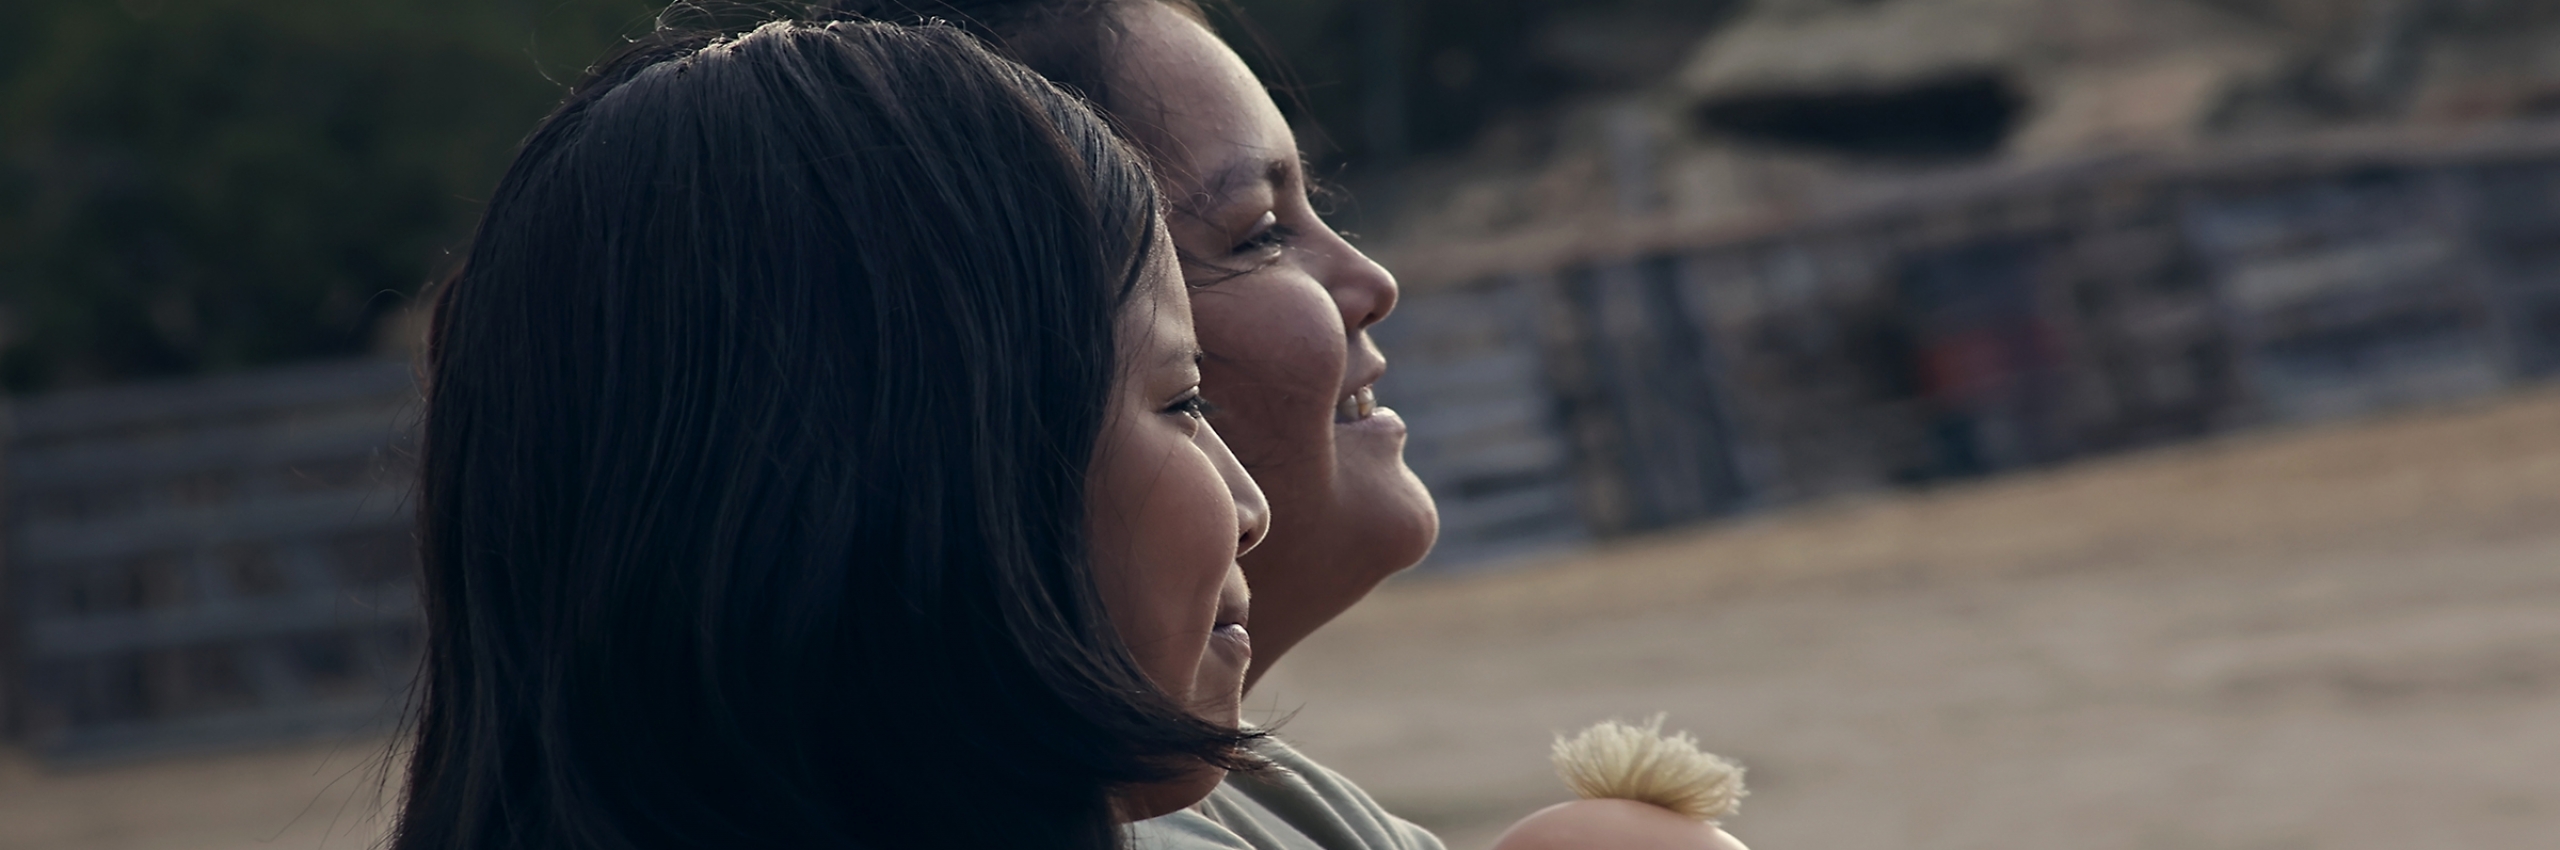 A still from the film Frybread of two women staring in the distance, one holds a doll.